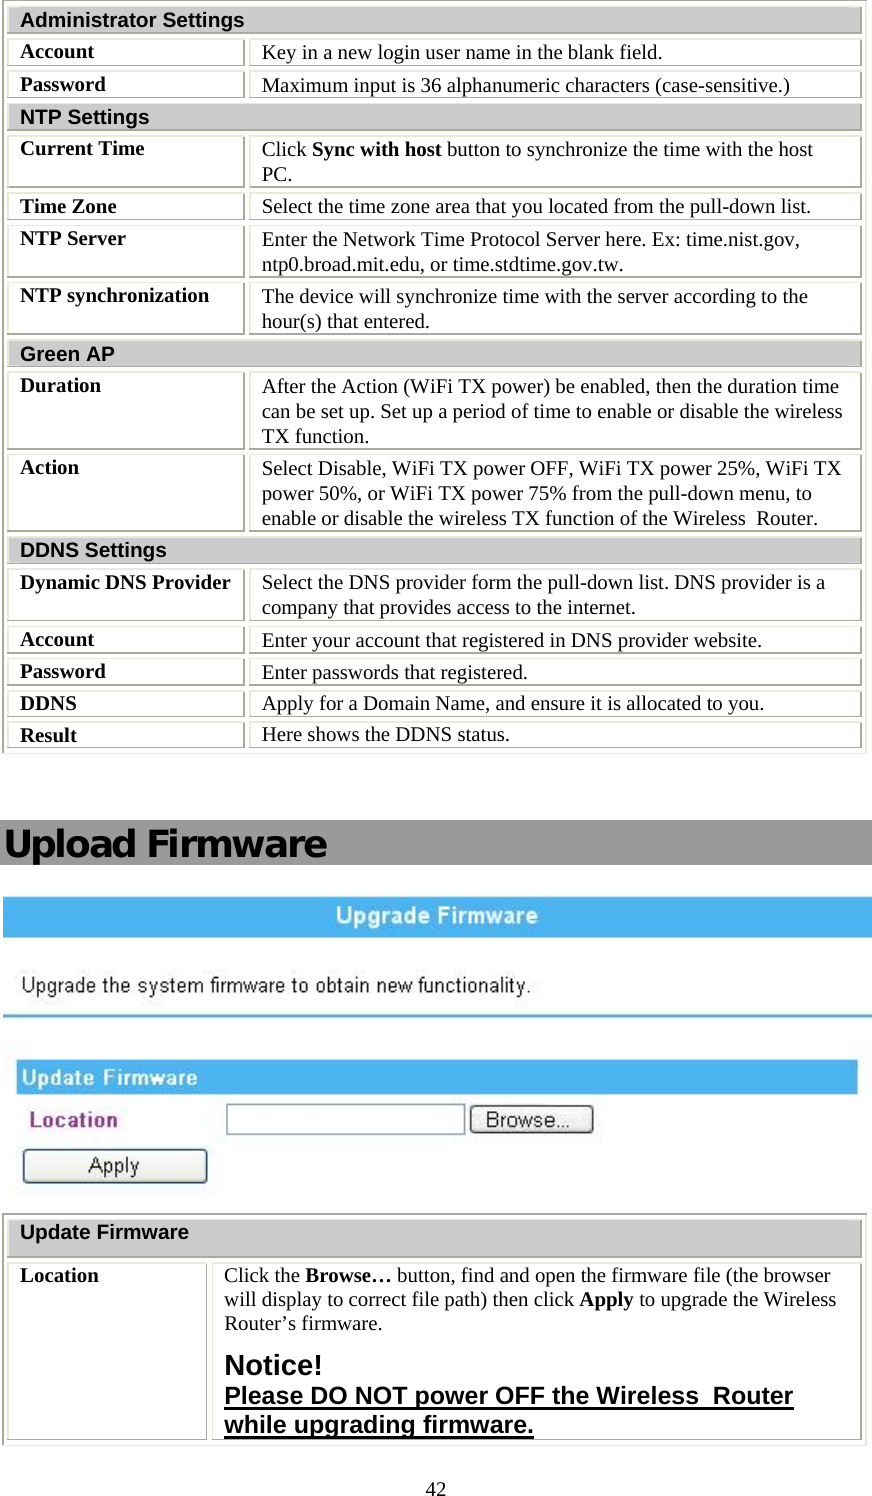   42Administrator Settings Account  Key in a new login user name in the blank field. Password  Maximum input is 36 alphanumeric characters (case-sensitive.) NTP Settings Current Time  Click Sync with host button to synchronize the time with the host PC. Time Zone  Select the time zone area that you located from the pull-down list. NTP Server  Enter the Network Time Protocol Server here. Ex: time.nist.gov, ntp0.broad.mit.edu, or time.stdtime.gov.tw. NTP synchronization  The device will synchronize time with the server according to the hour(s) that entered. Green AP Duration  After the Action (WiFi TX power) be enabled, then the duration time can be set up. Set up a period of time to enable or disable the wireless TX function. Action  Select Disable, WiFi TX power OFF, WiFi TX power 25%, WiFi TX power 50%, or WiFi TX power 75% from the pull-down menu, to enable or disable the wireless TX function of the Wireless  Router.  DDNS Settings Dynamic DNS Provider  Select the DNS provider form the pull-down list. DNS provider is a company that provides access to the internet. Account  Enter your account that registered in DNS provider website. Password   Enter passwords that registered.  DDNS  Apply for a Domain Name, and ensure it is allocated to you. Result  Here shows the DDNS status.  Upload Firmware  Update Firmware Location  Click the Browse… button, find and open the firmware file (the browser will display to correct file path) then click Apply to upgrade the Wireless  Router’s firmware.  Notice! Please DO NOT power OFF the Wireless  Router while upgrading firmware. 